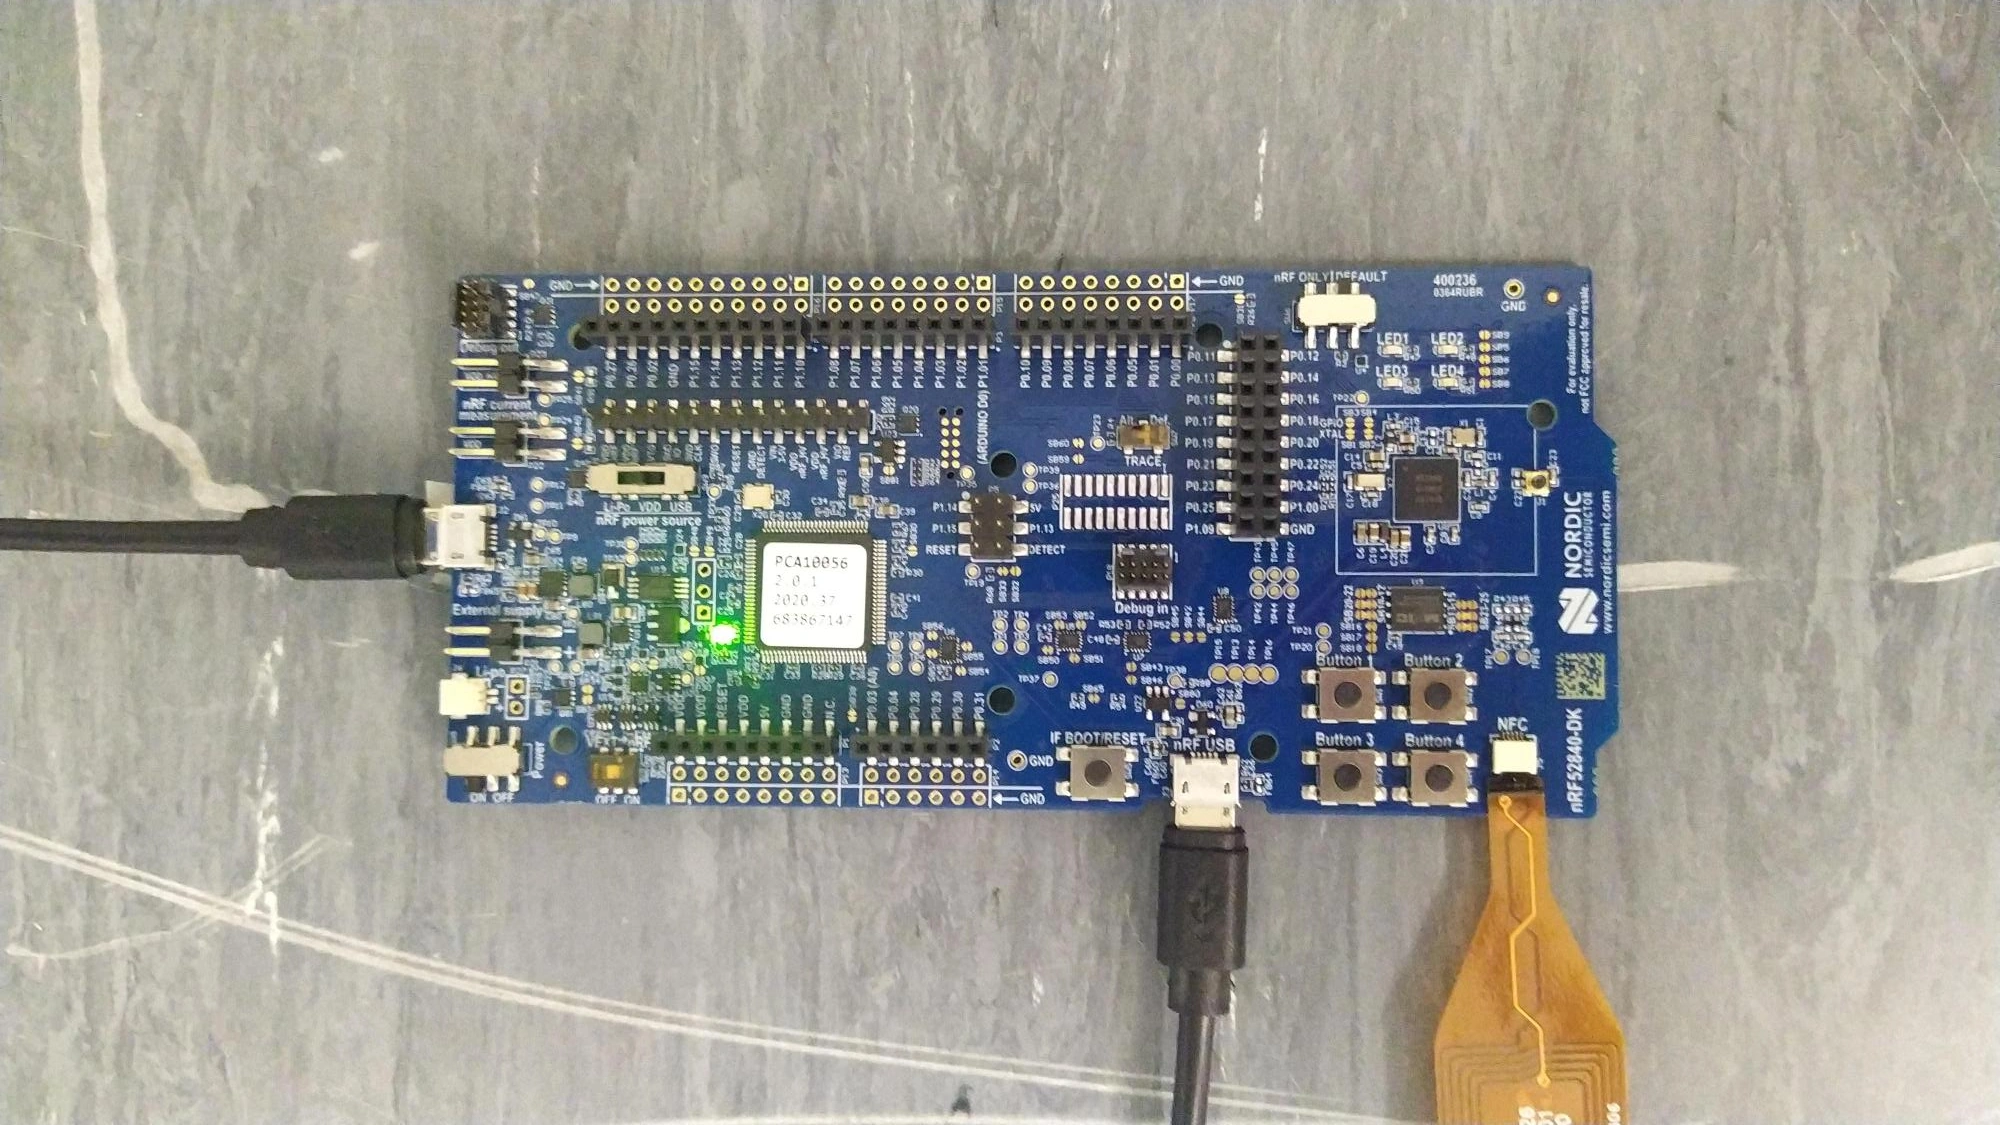 An nRF52840 DK with two USB cables connected to it